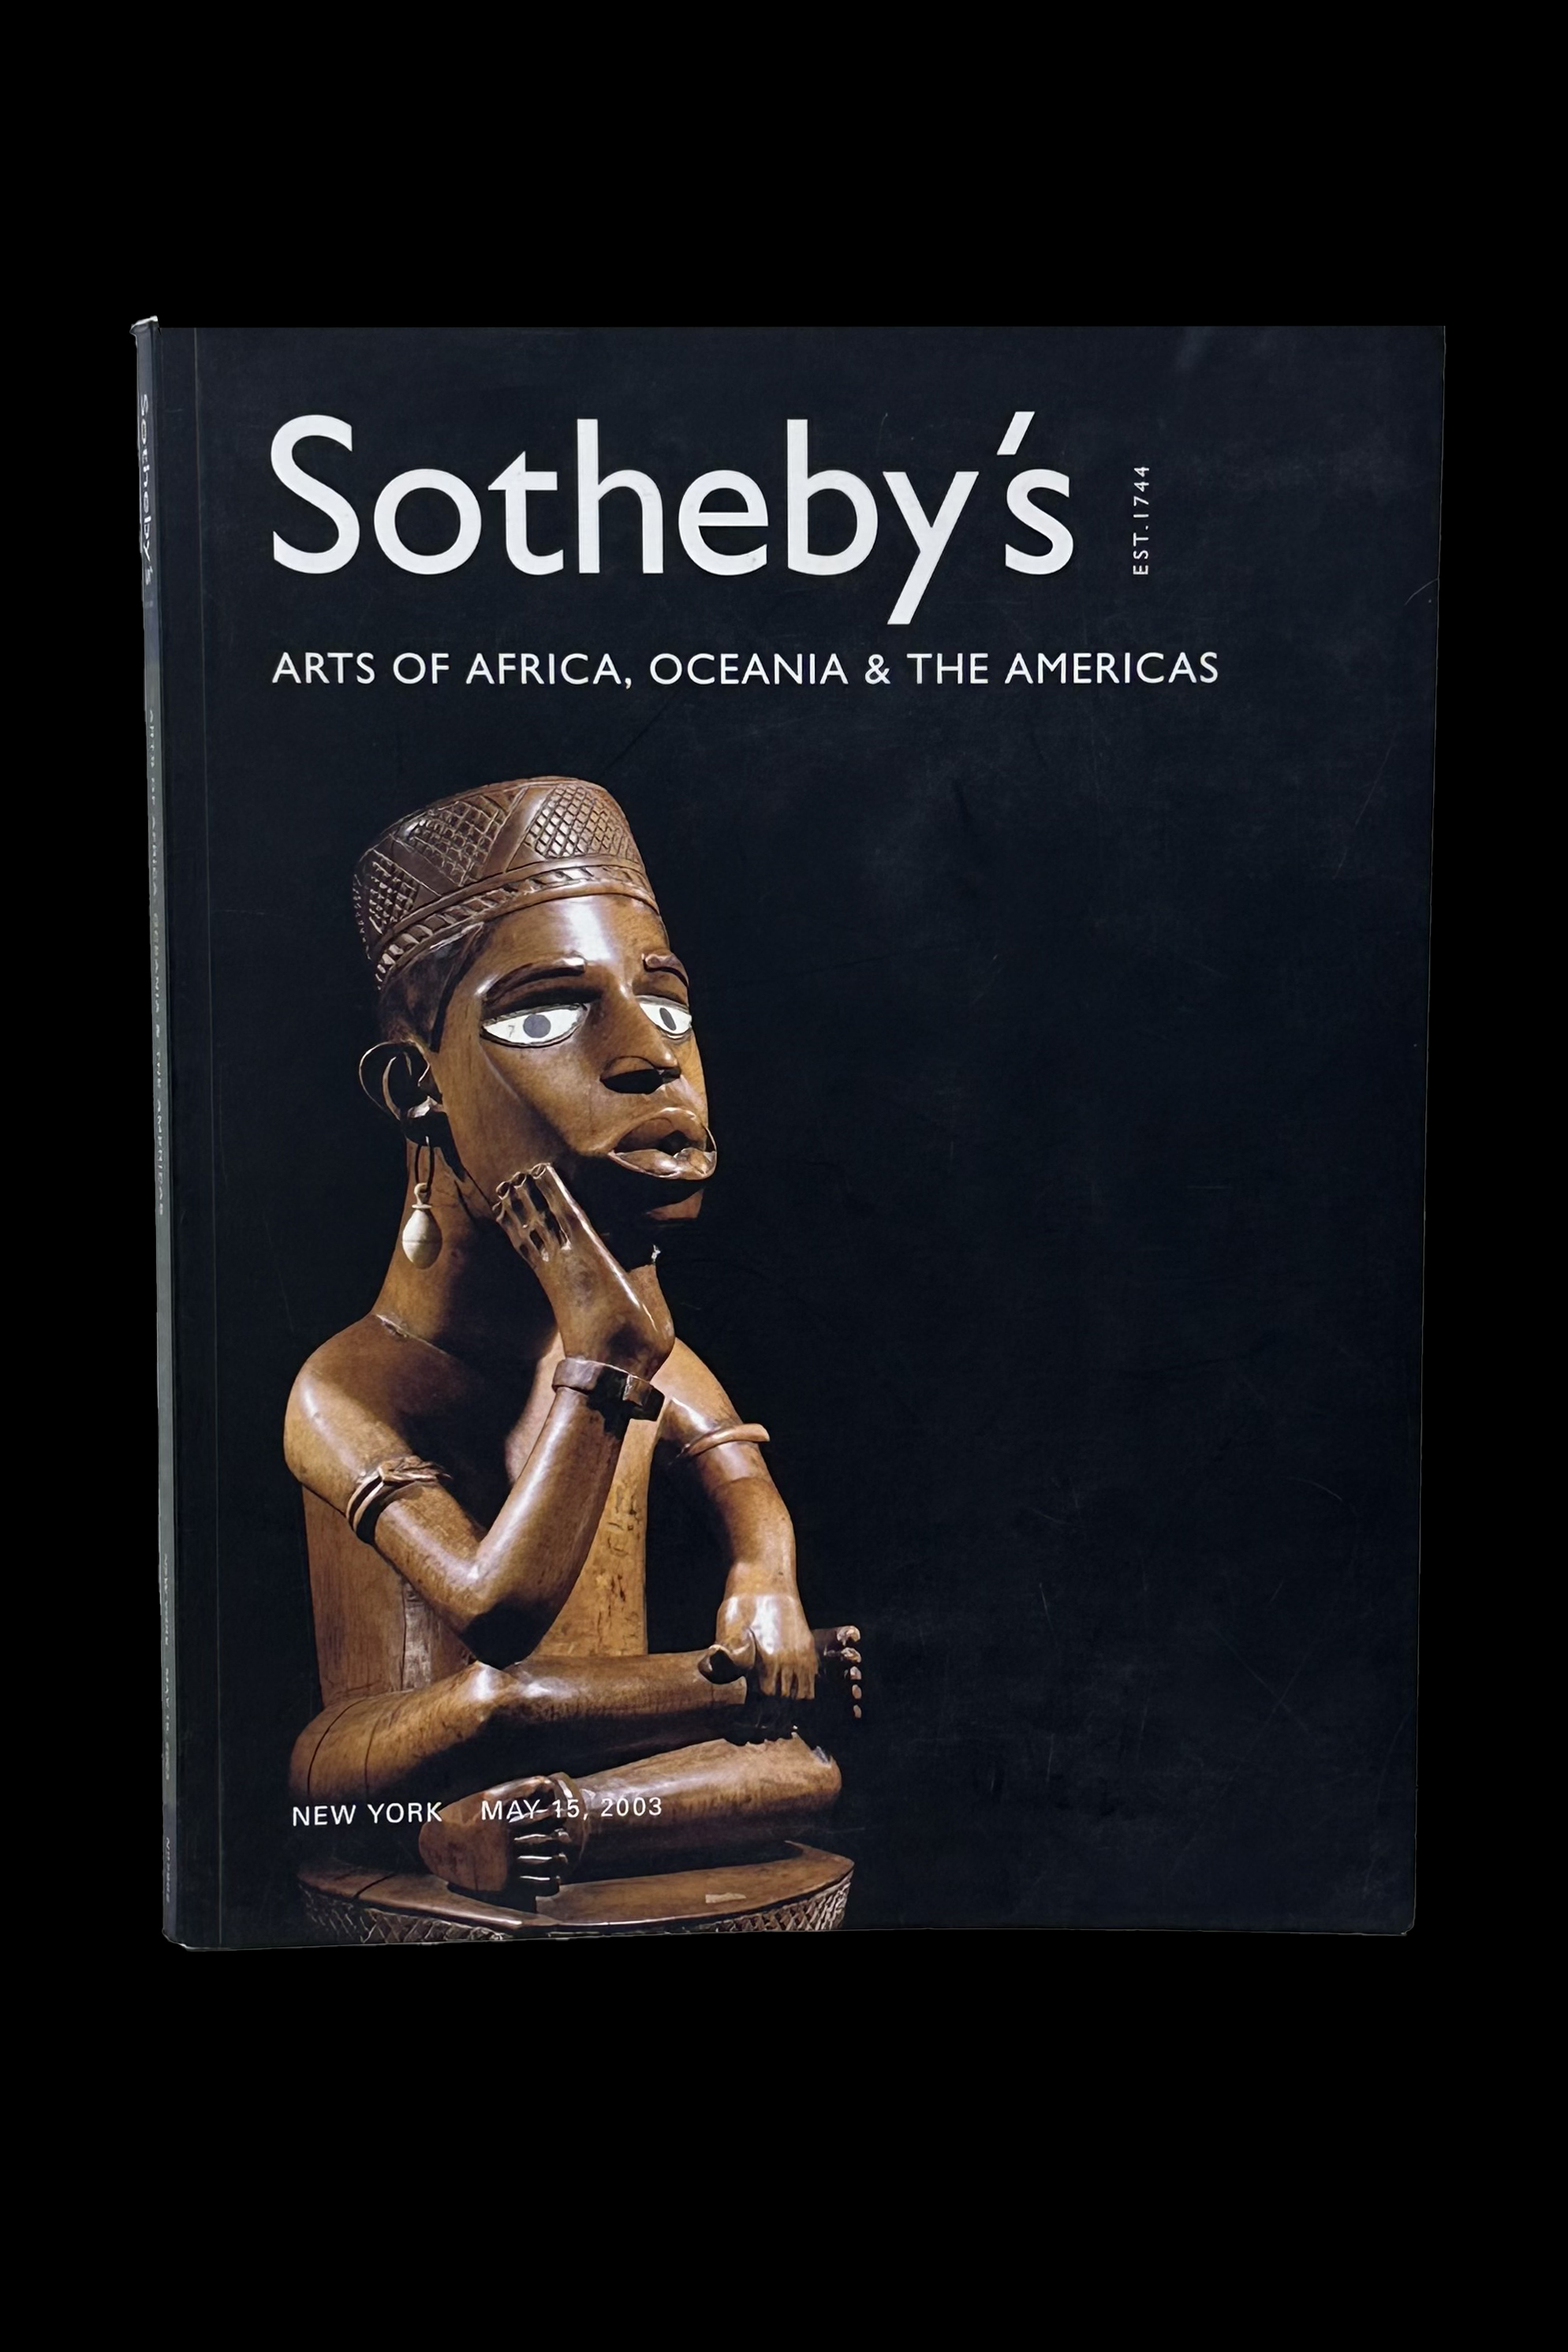 Sotheby's - Arts of Africa, Oceania & The Americas - New York, May 2003